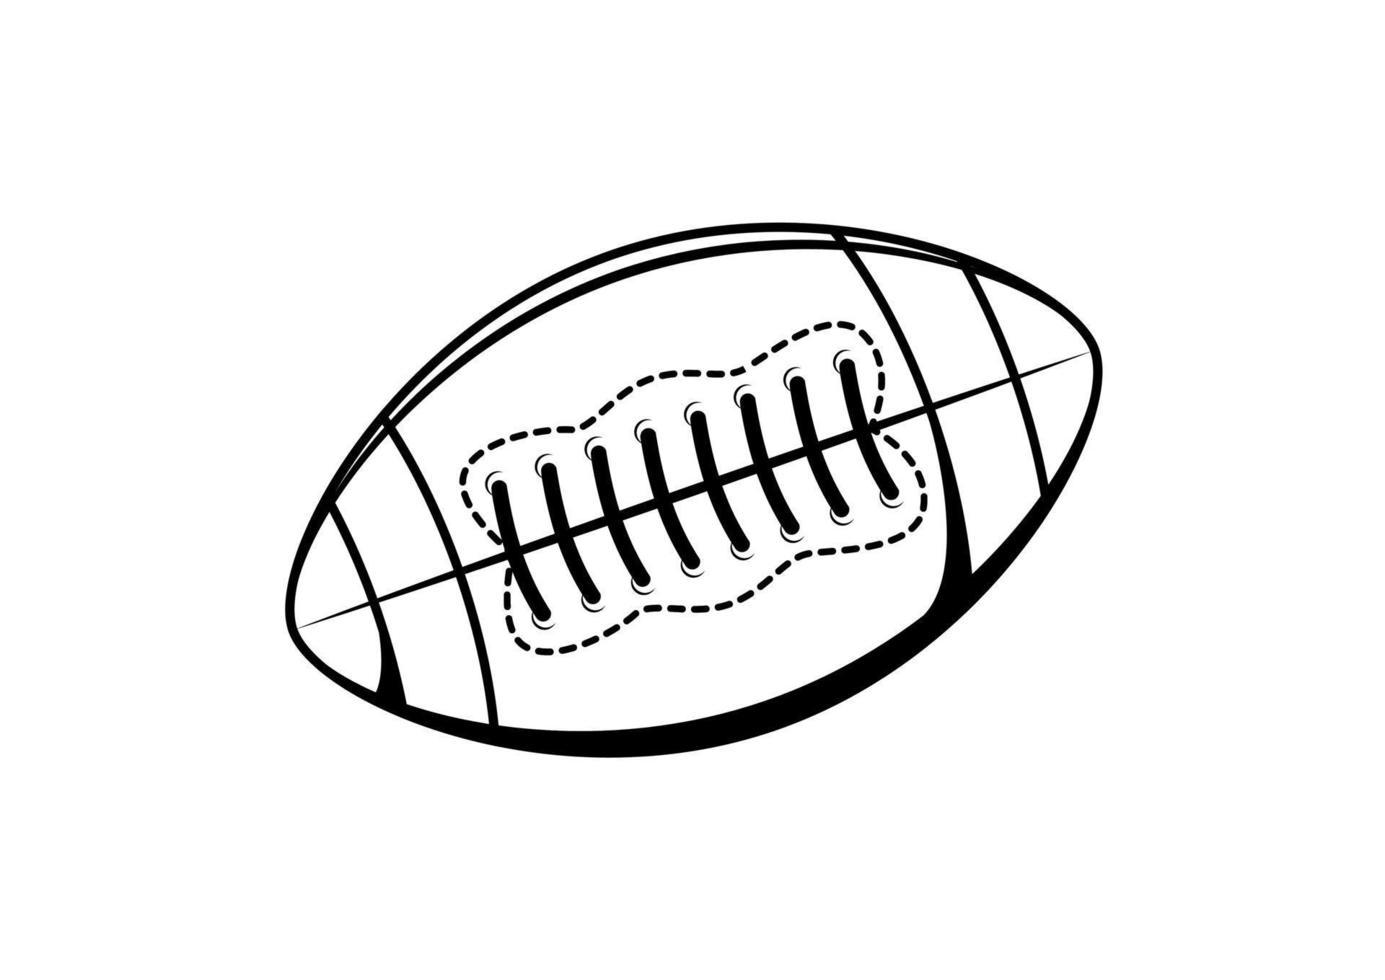 Black and White Rugby Ball Clipart Vector on White Background